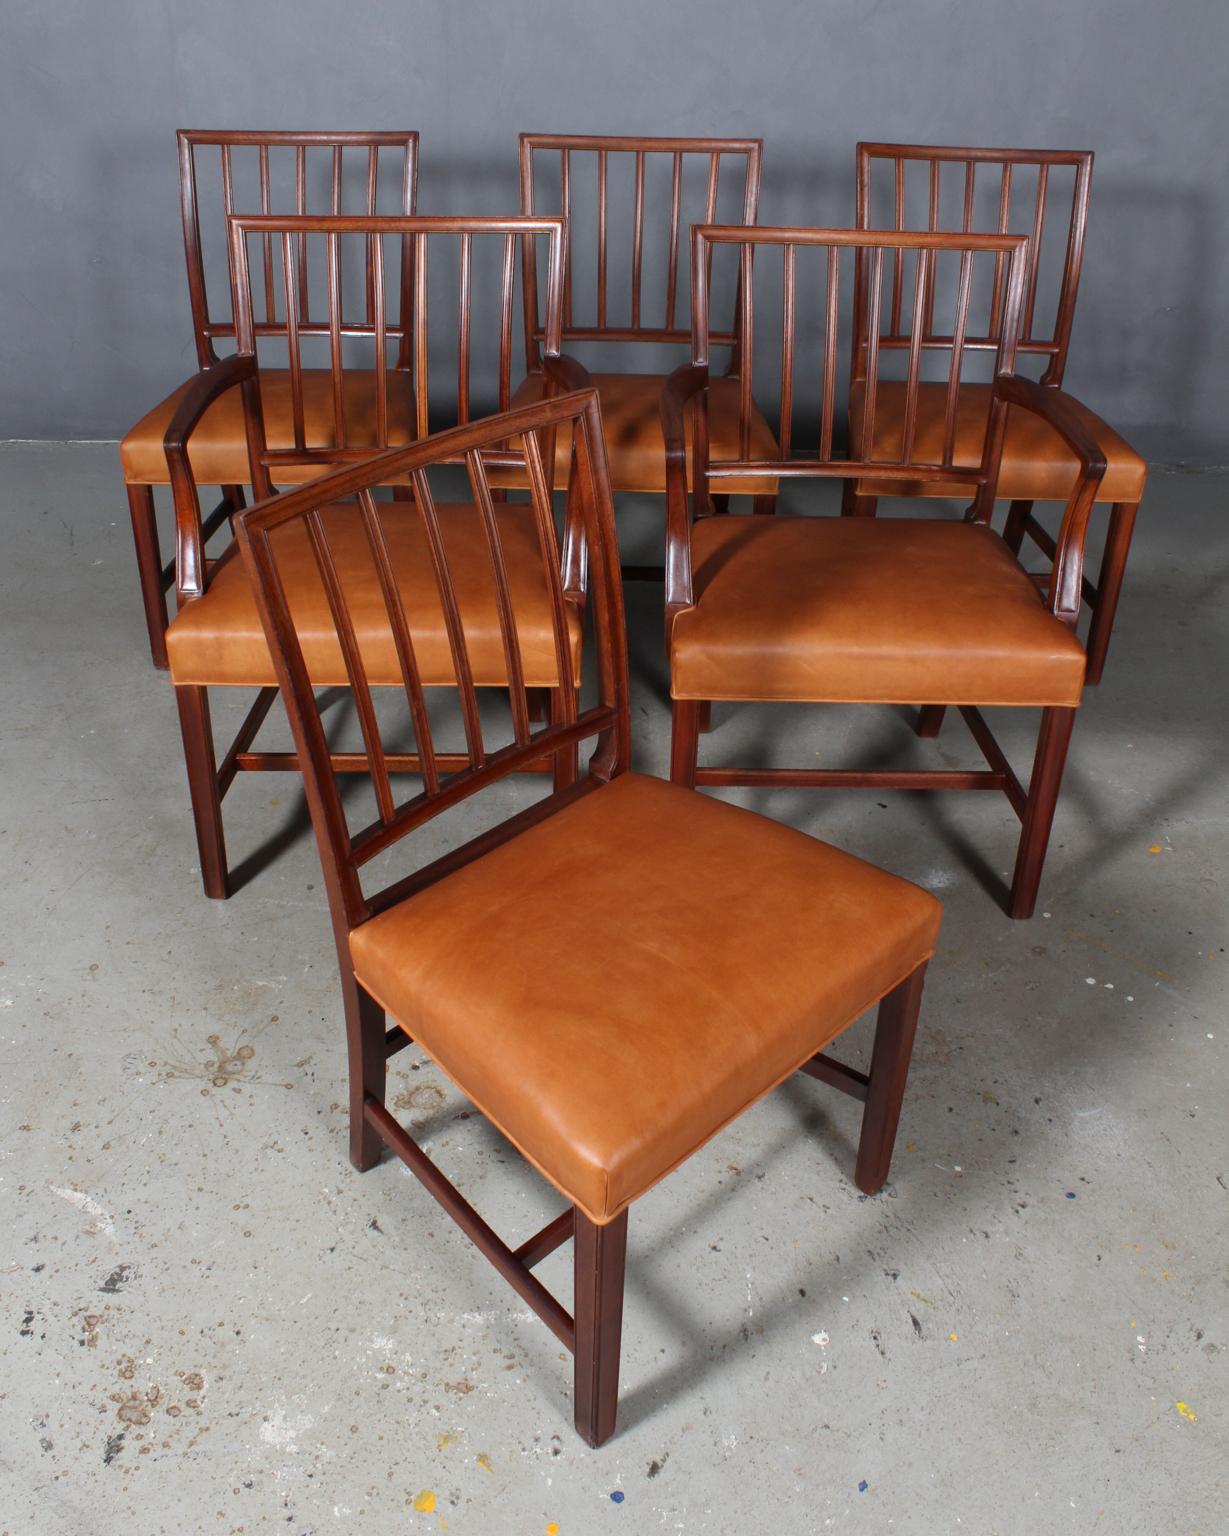 Jacob Kjær six chairs new upholstered with vintage tan aniline leather.

Frame of Cuba mahogany.

Model Pariser stolen designed for the world exhibition in 1937 in Paris, made by Jacob Kjær.

